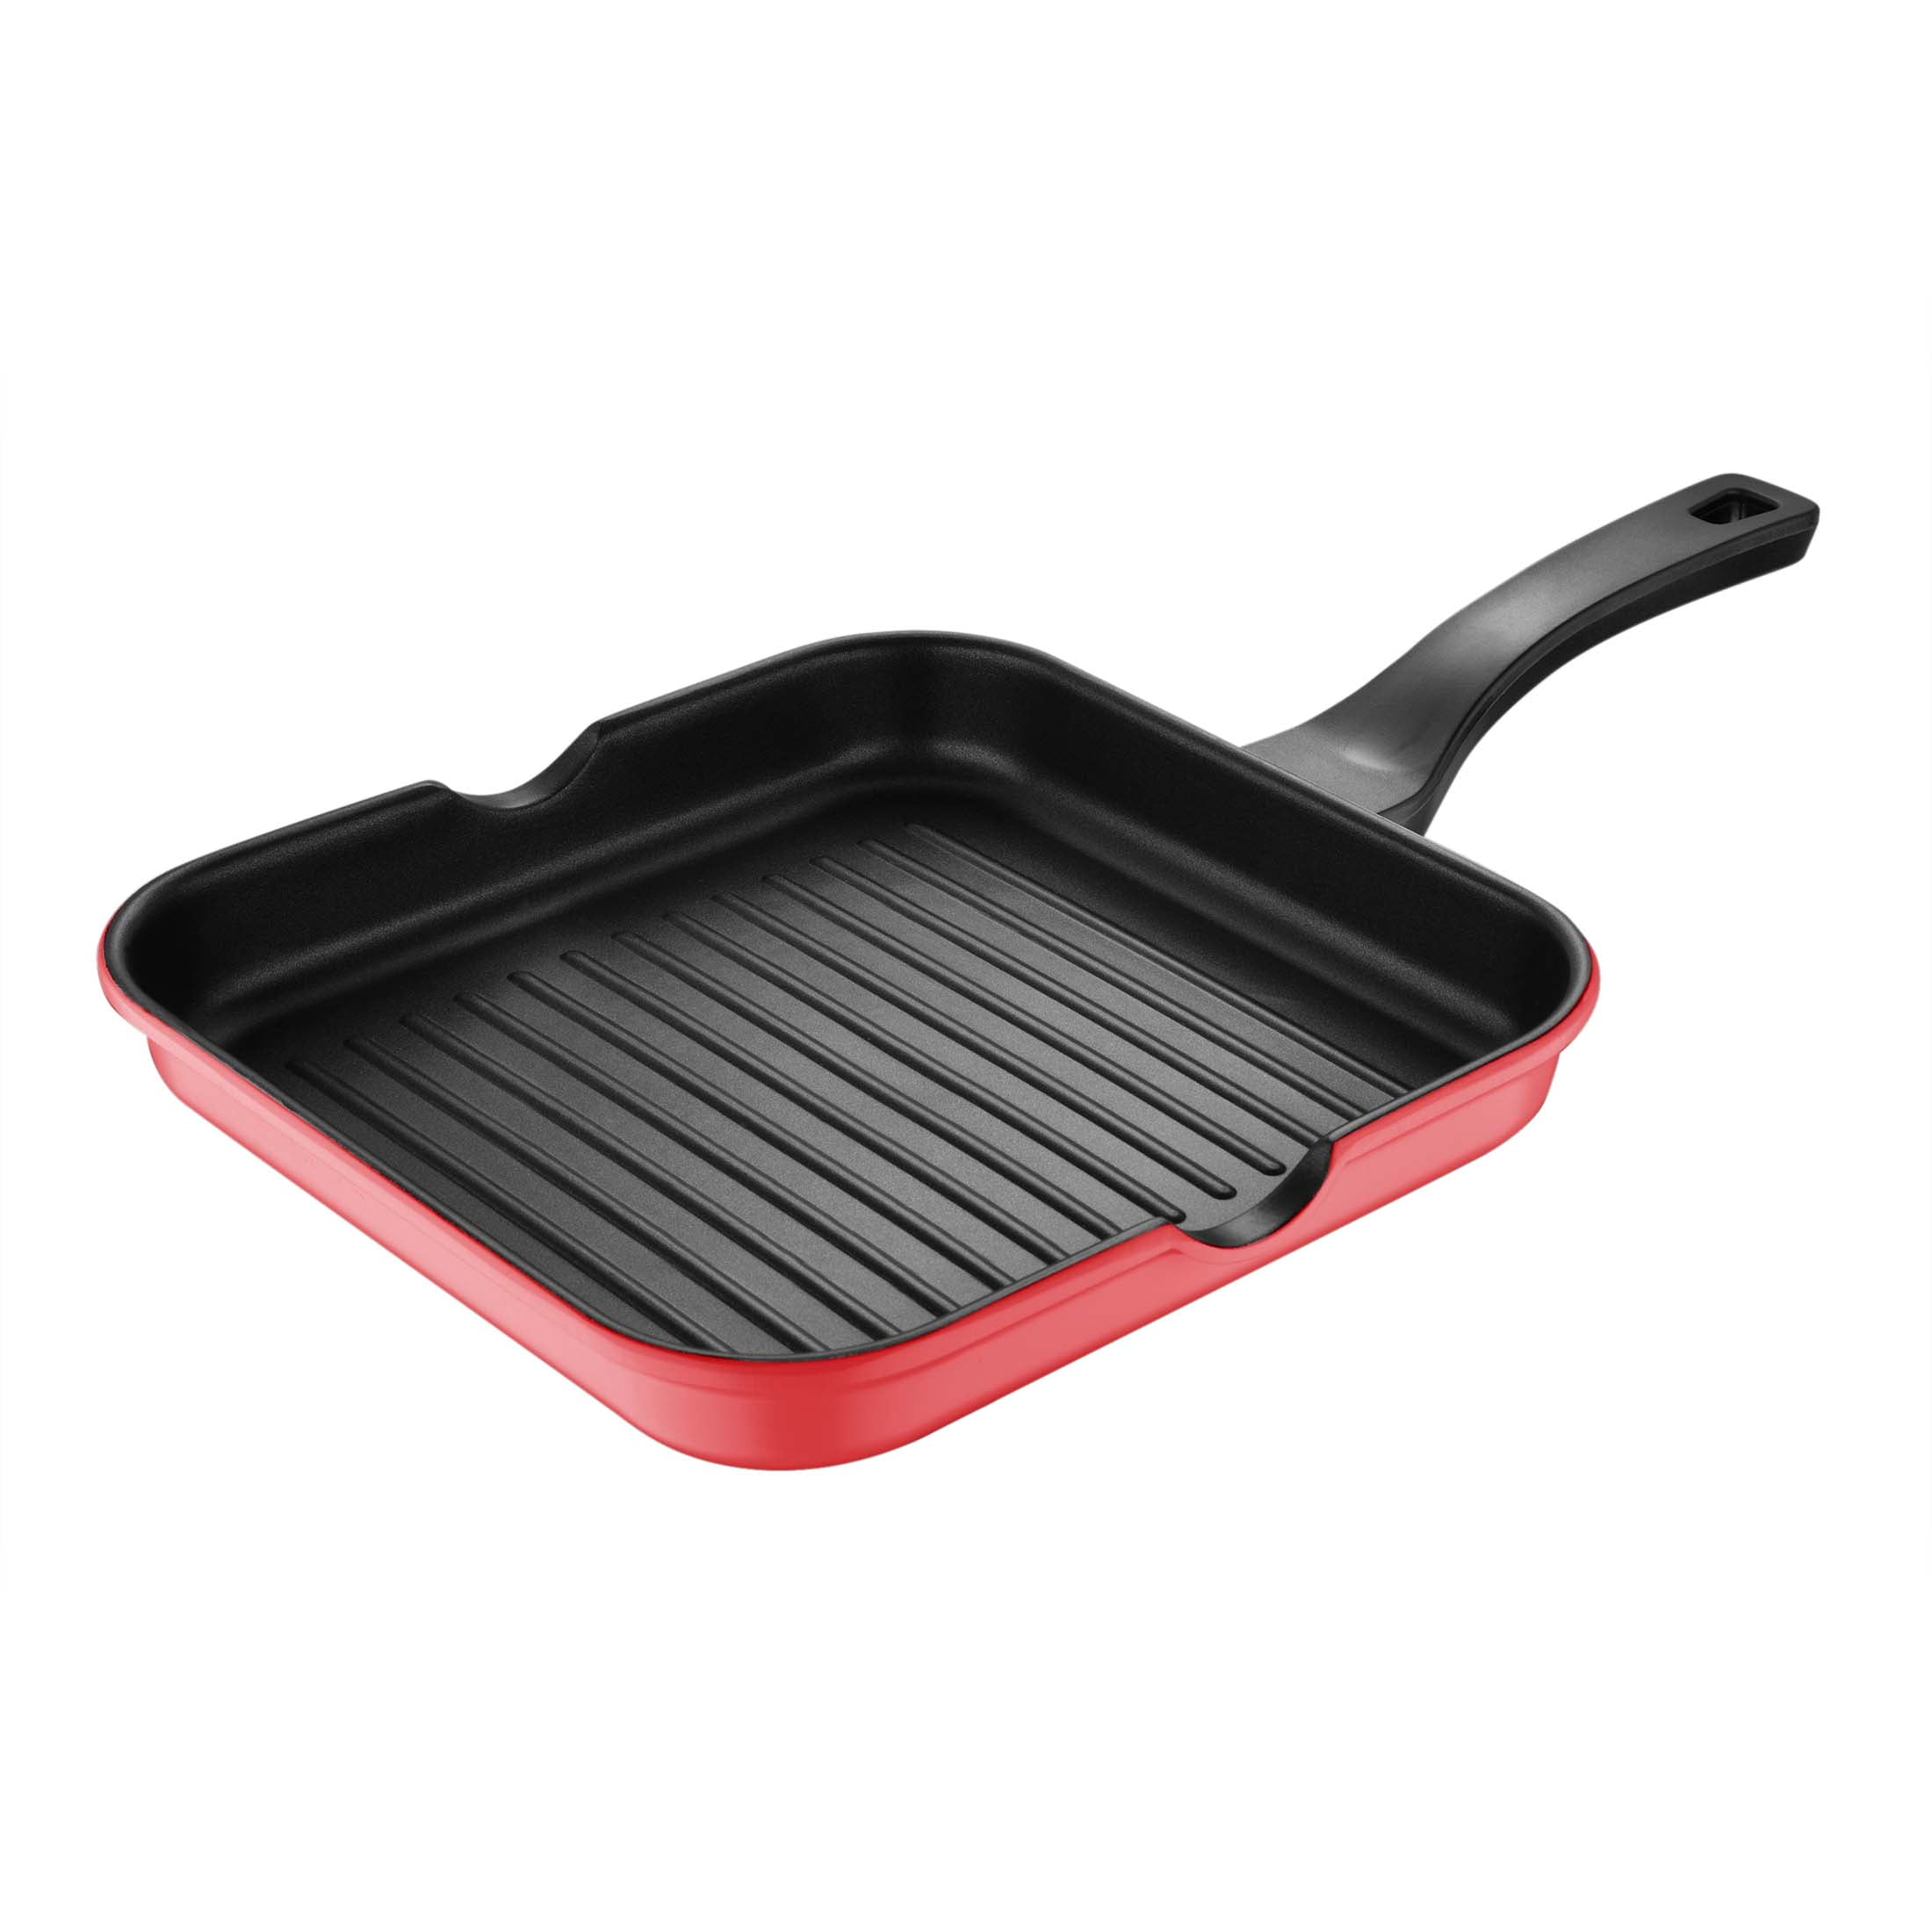 Discount Family Gifts Habitat Large Cast Iron Grill Pan - Orange for Home 